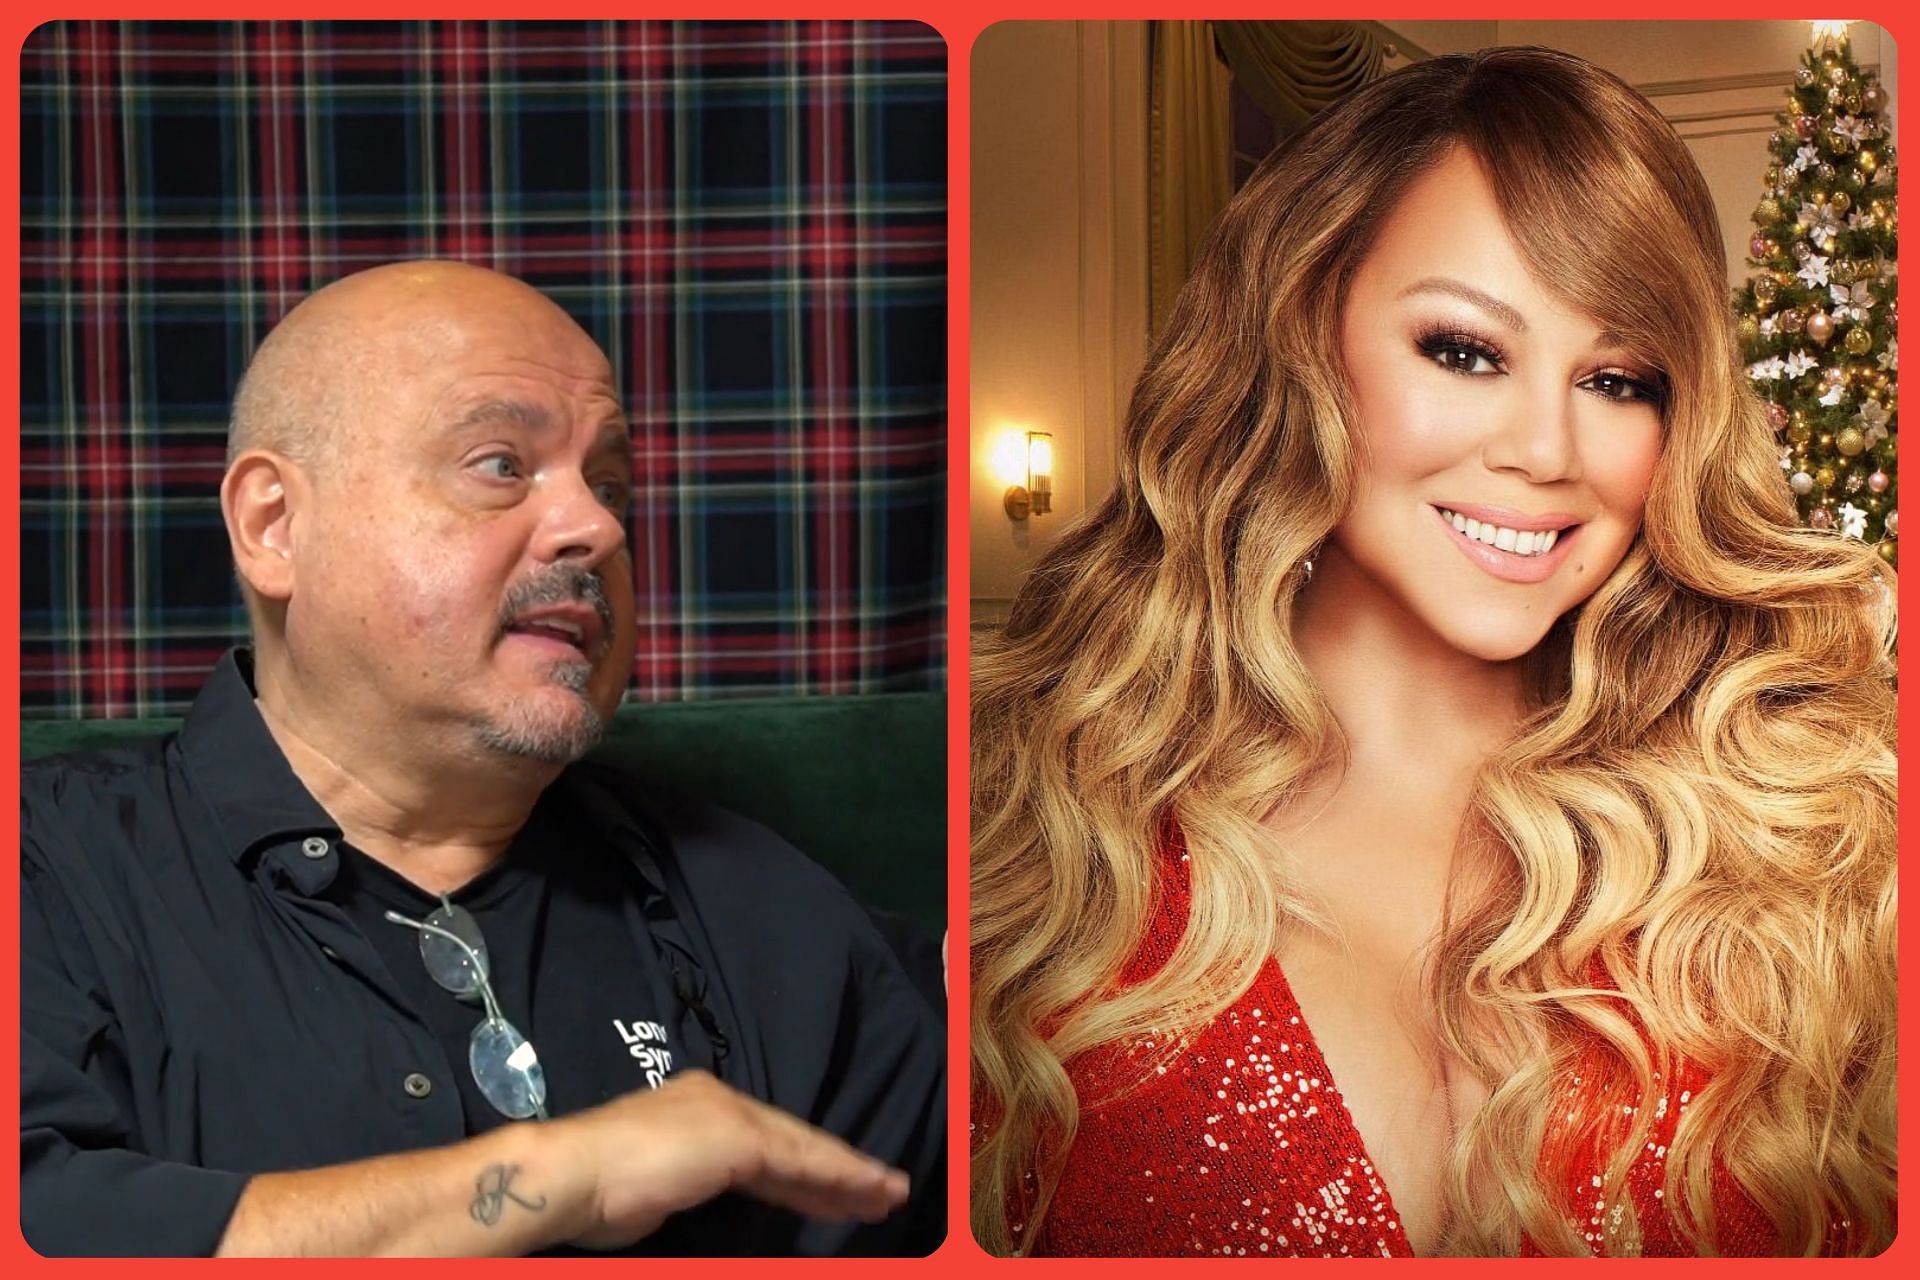 Walter Afanasieff slammed Mariah Carey over credit issues for 